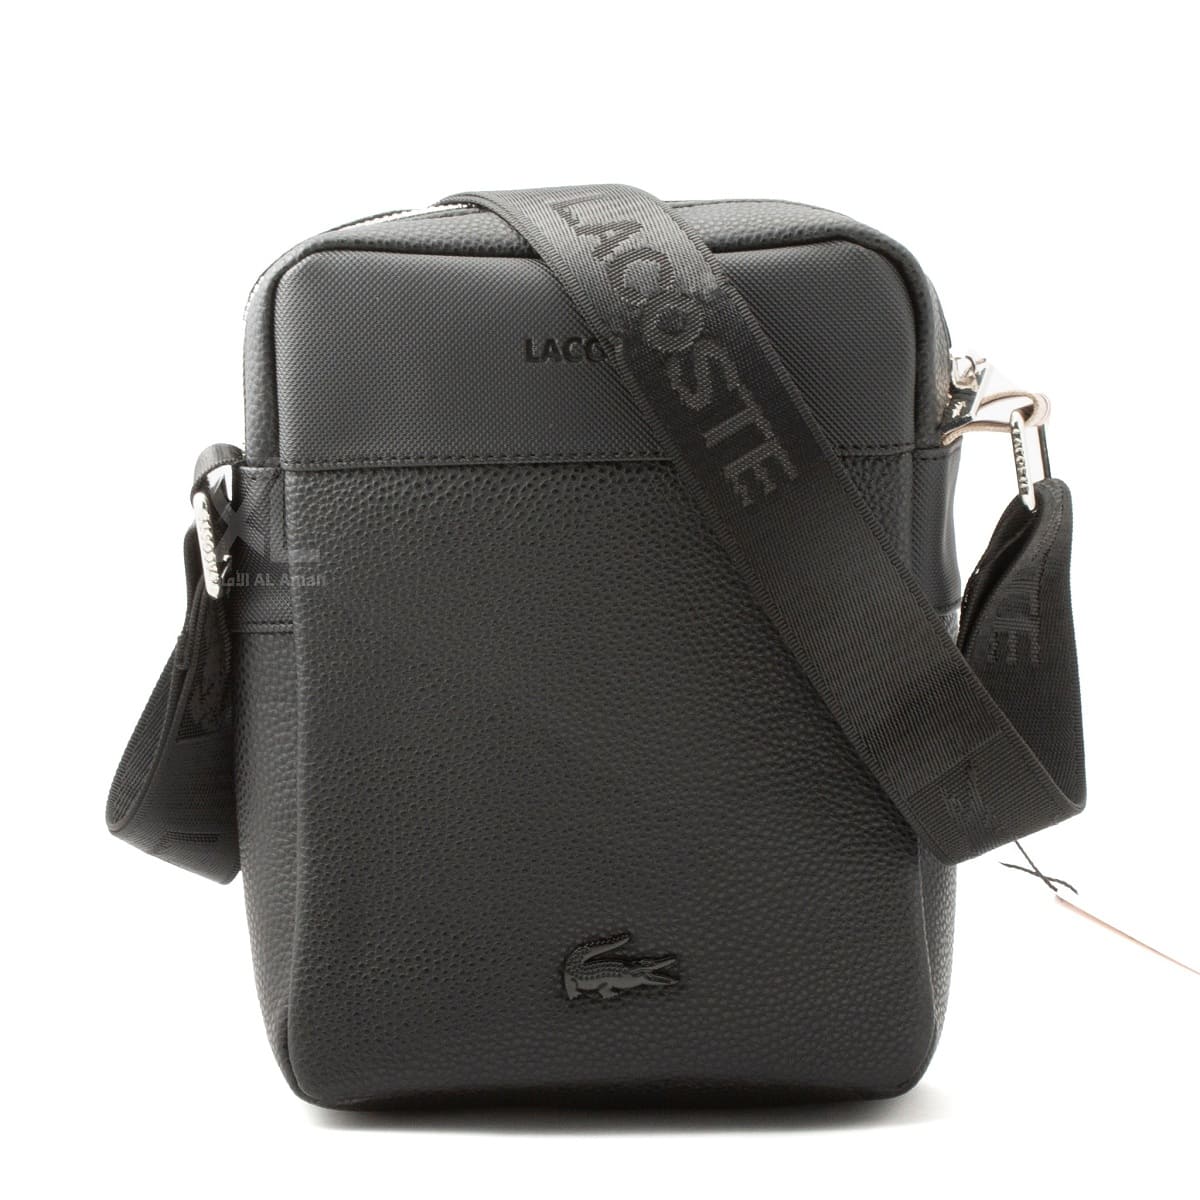 Lacoste-crossbag-with-hand-black-color-leather-men's-bag